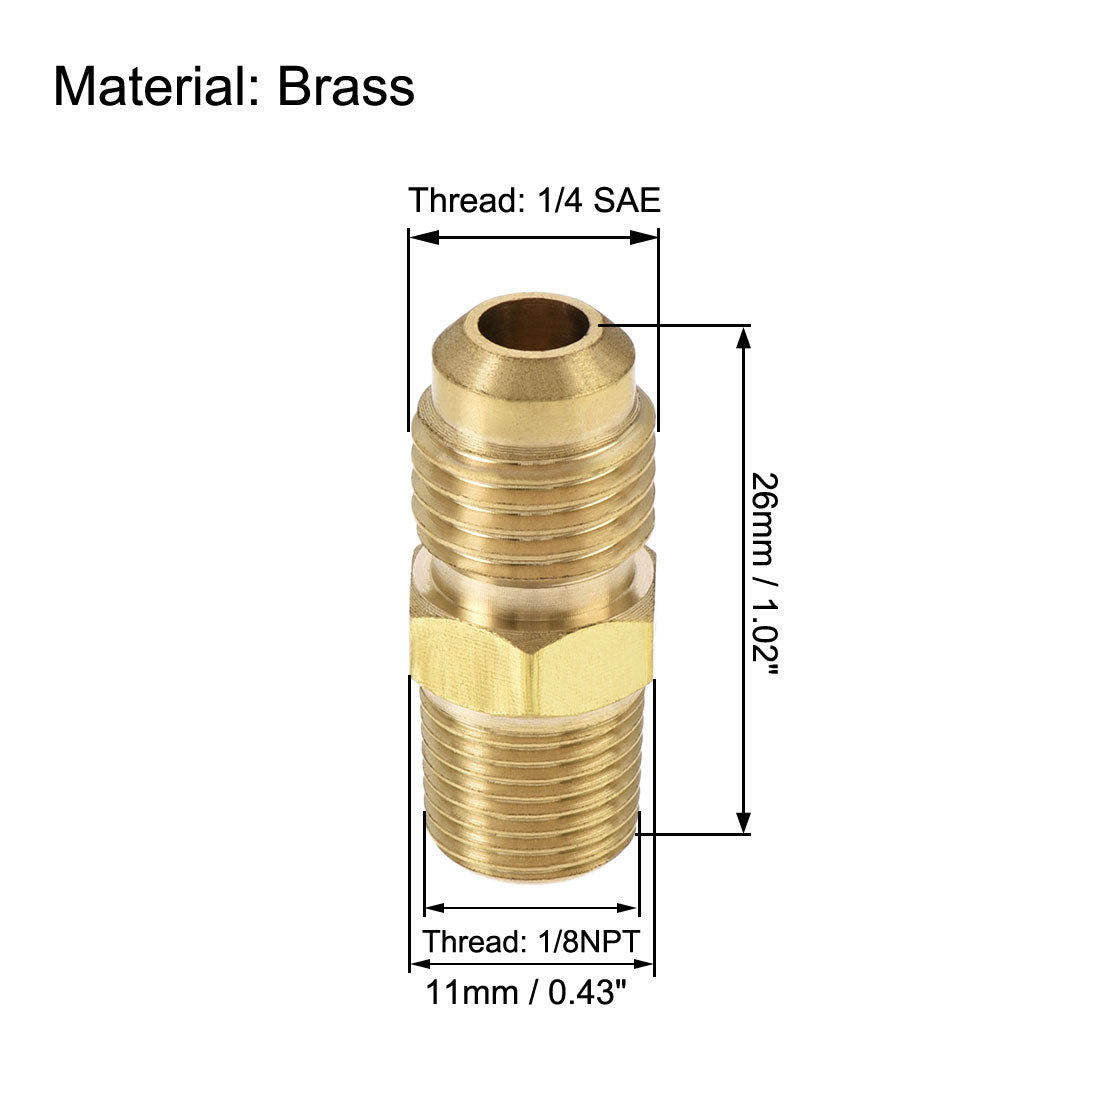 Uxcell Uxcell Brass Pipe fitting, 3/8 SAE Flare to 3/8NPT Male Thread, Tubing Adapter Hose Connector, for Air Conditioner Refrigeration, 2Pcs